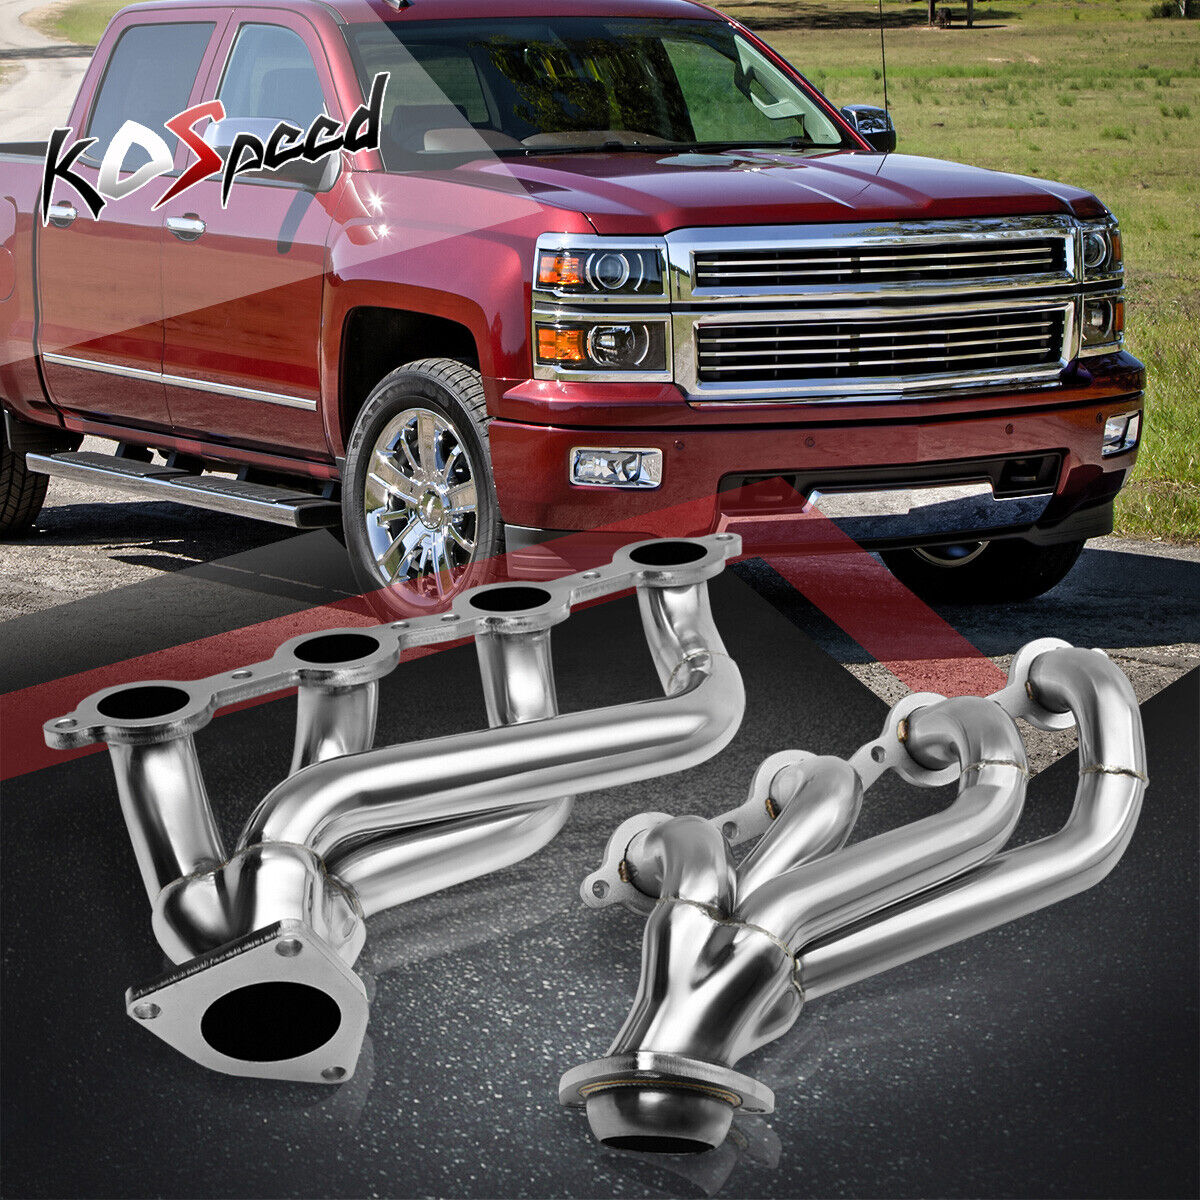 2x Stainless Steel High Flow Exhaust Header Manifold For 02-16 Chevy Silverado